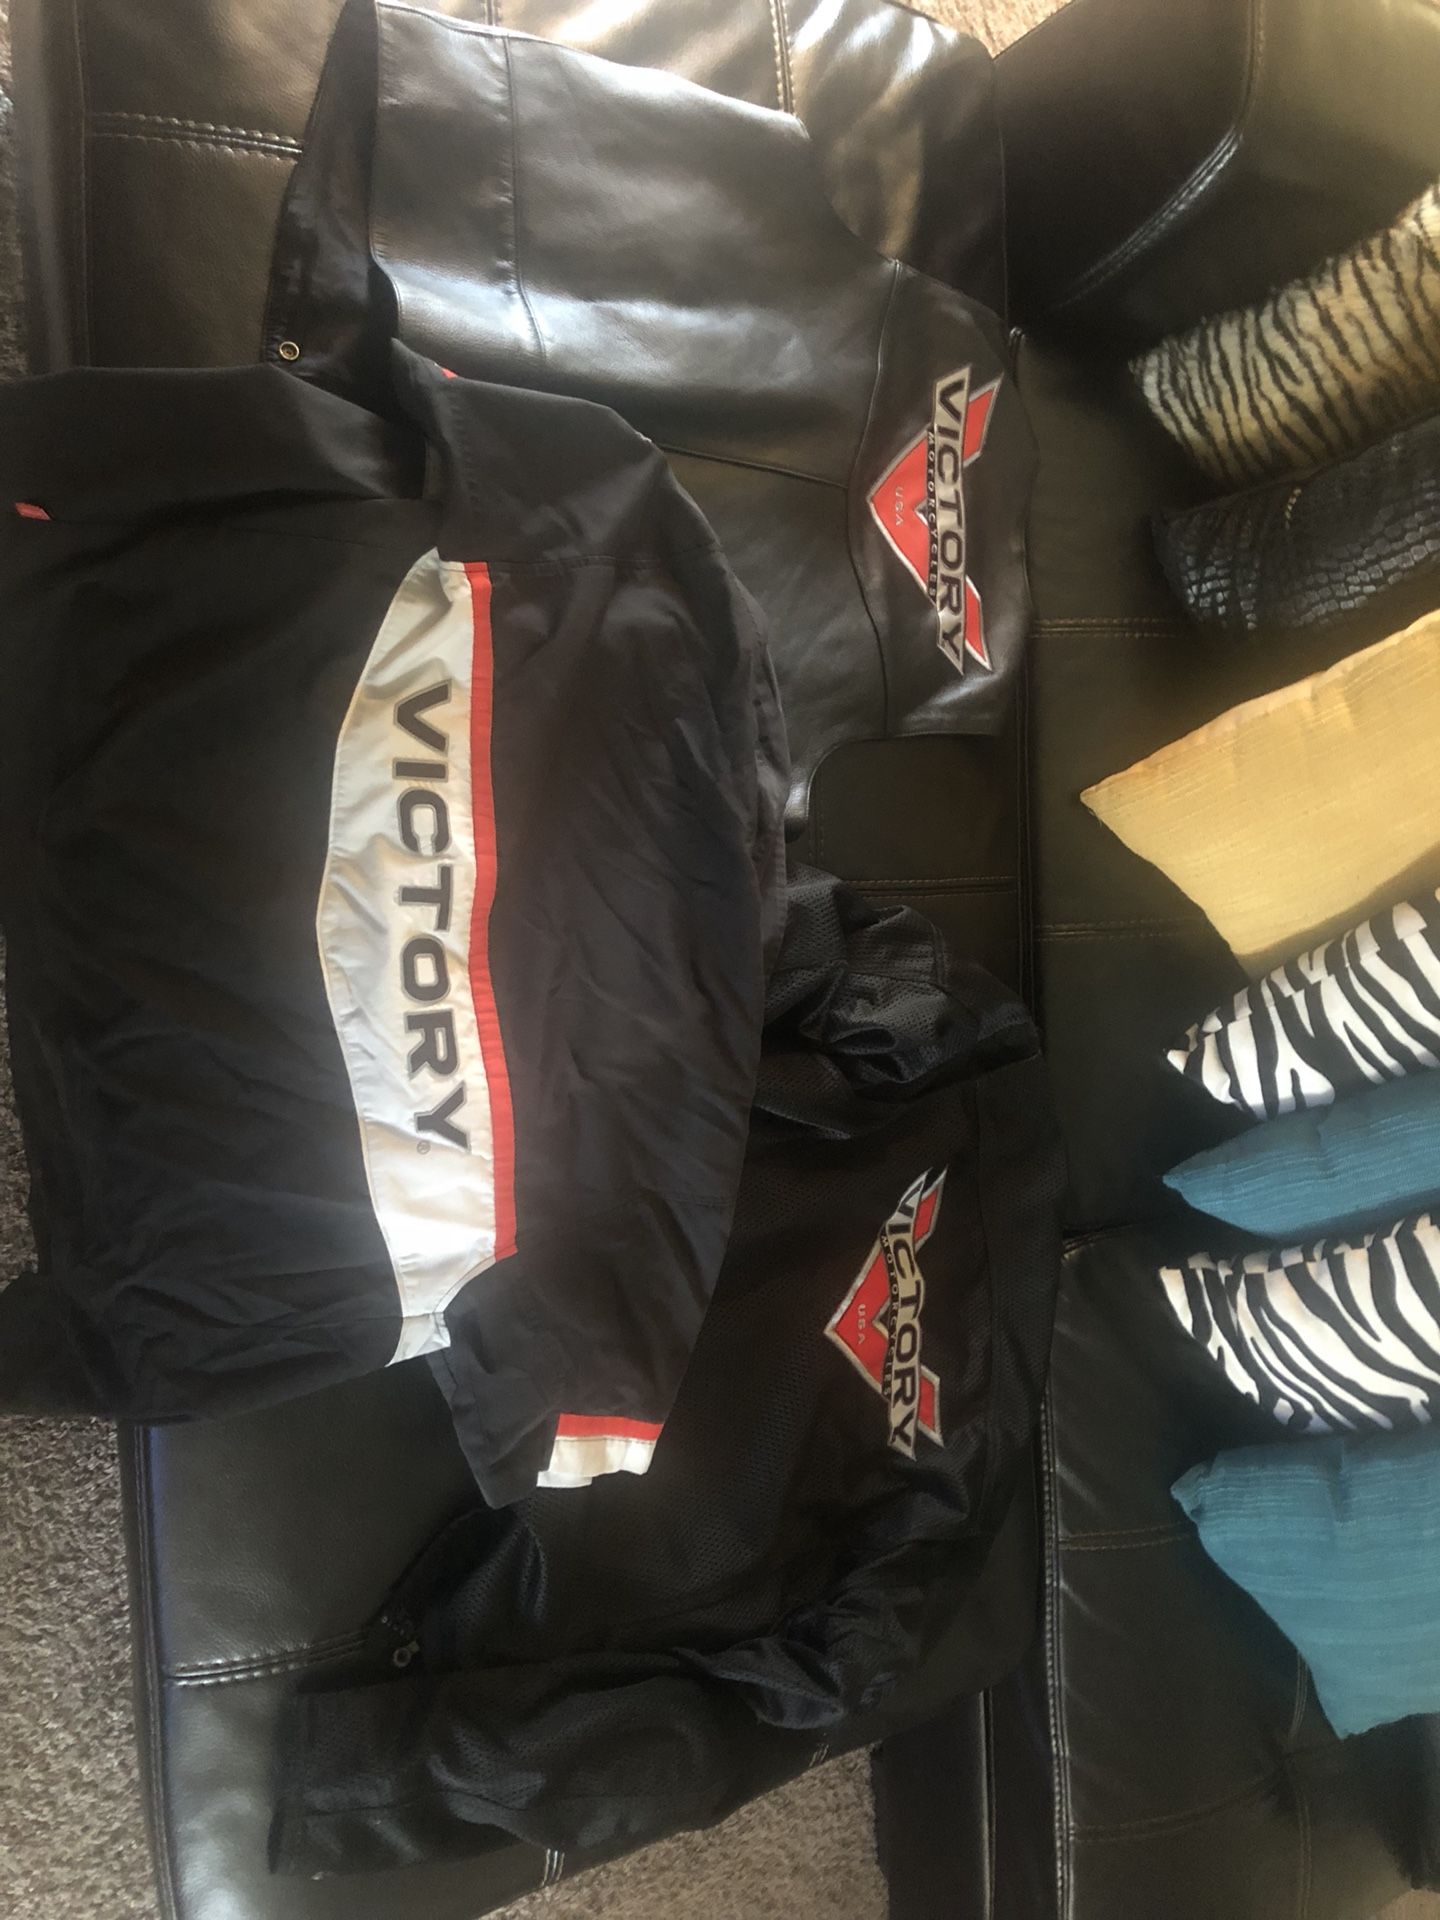 Victory motorcycle riding gear